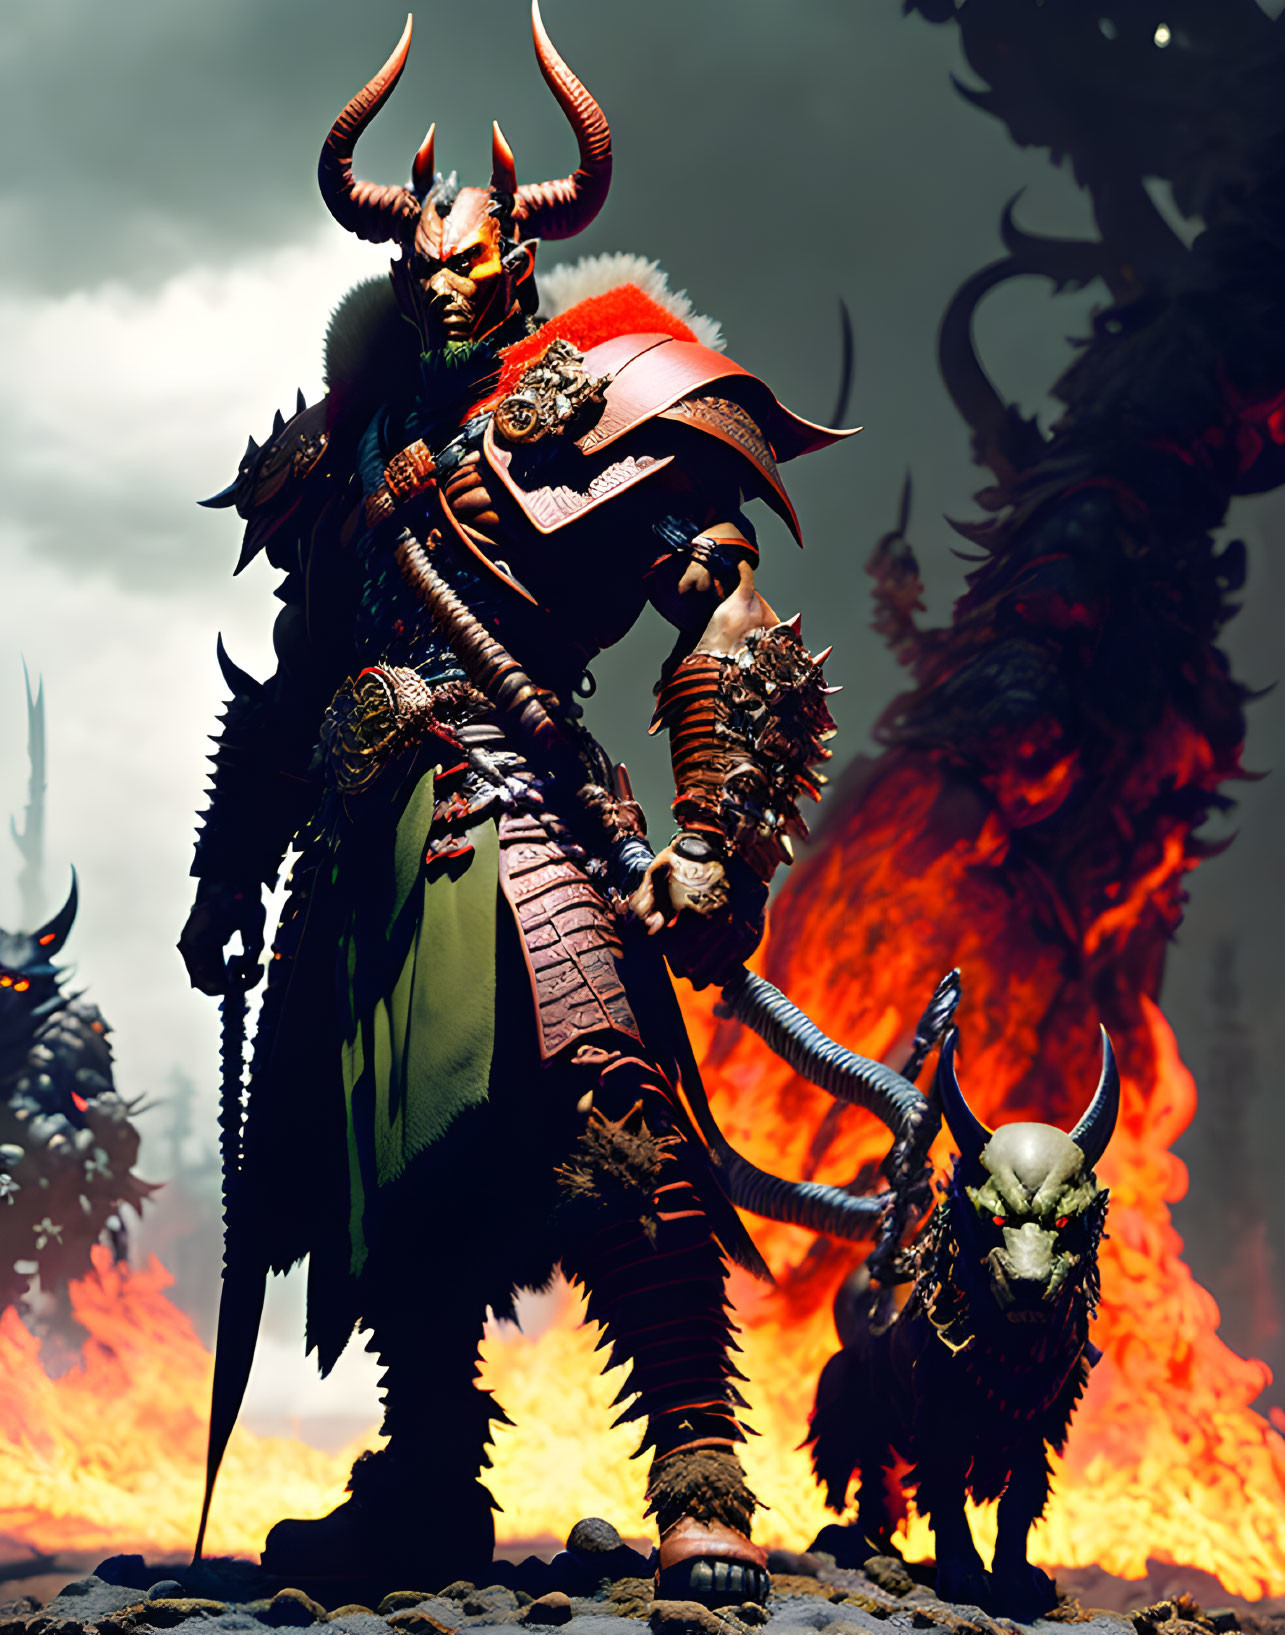 Fantasy character with horns and armor in front of fiery backdrop